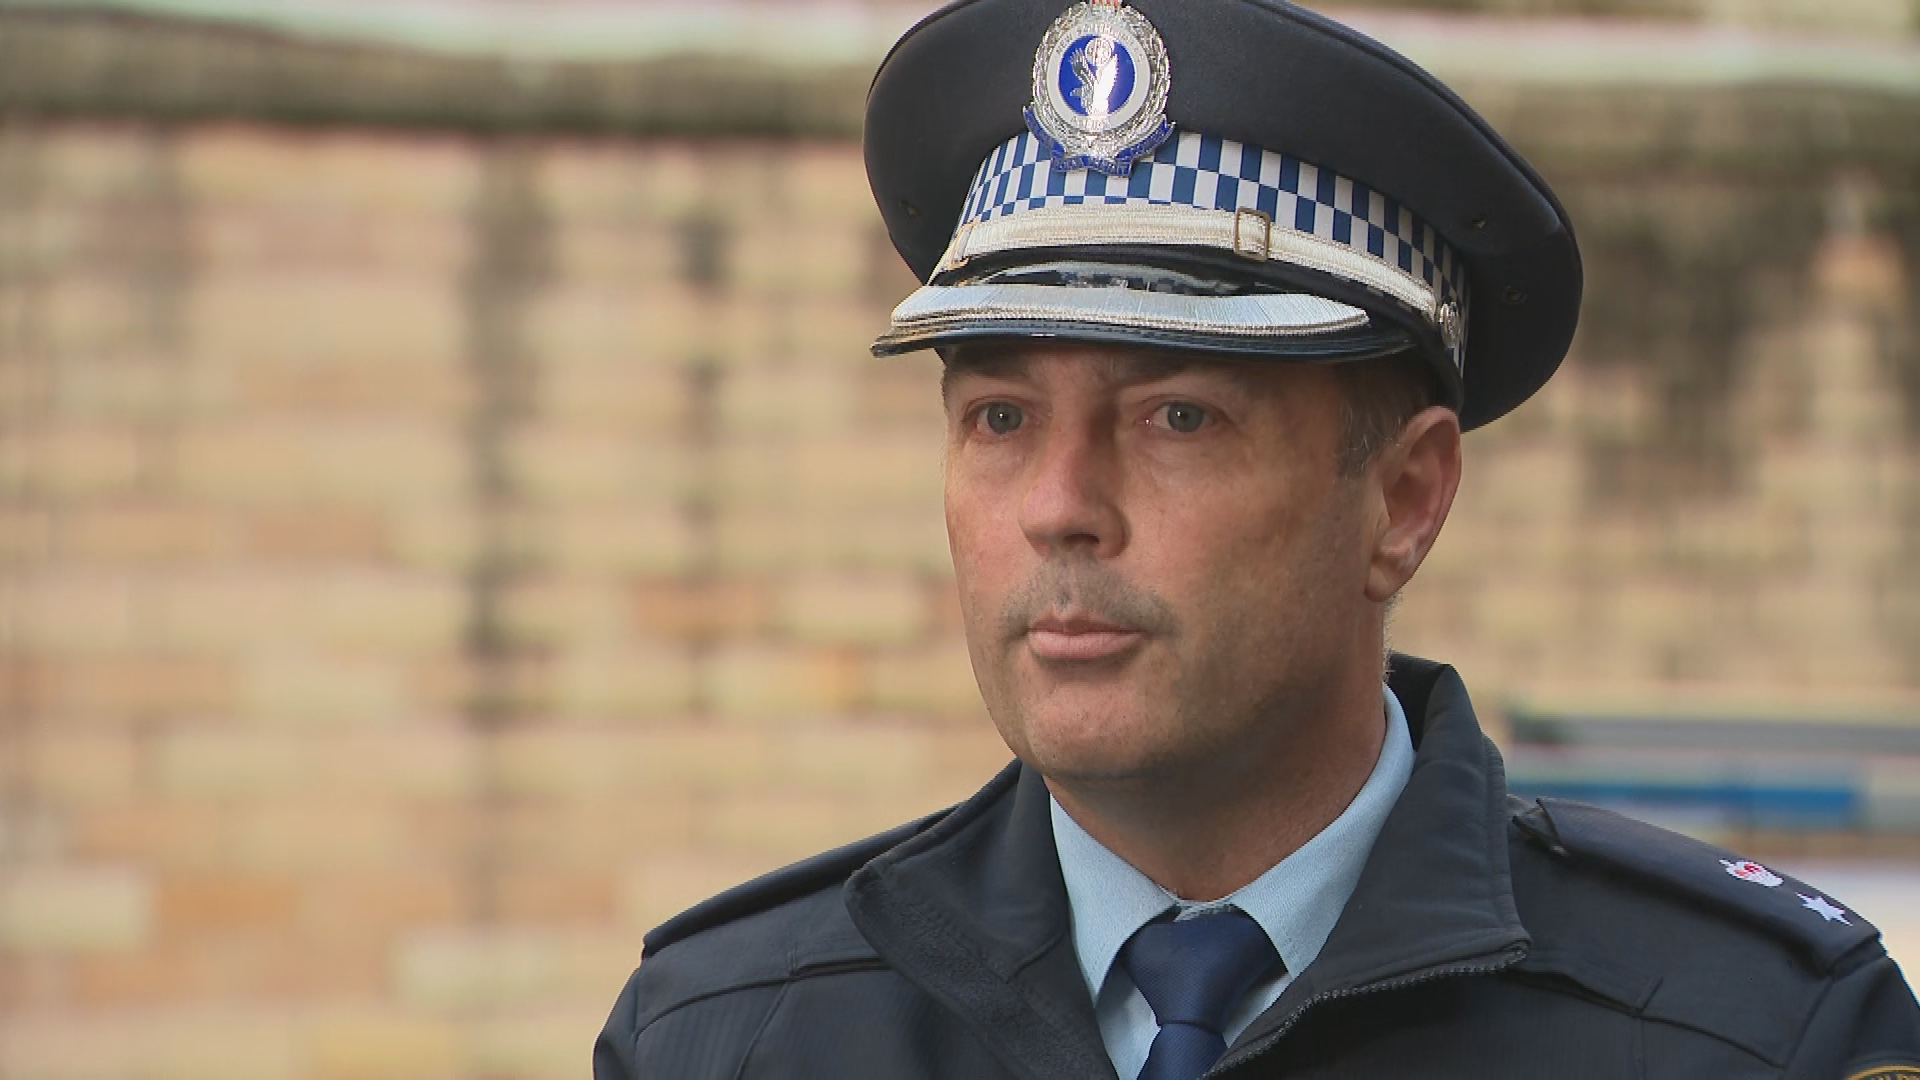 Acting Commissioner Rodney Pistola says a taskforce has been established to investigate the peeping Tom incident.